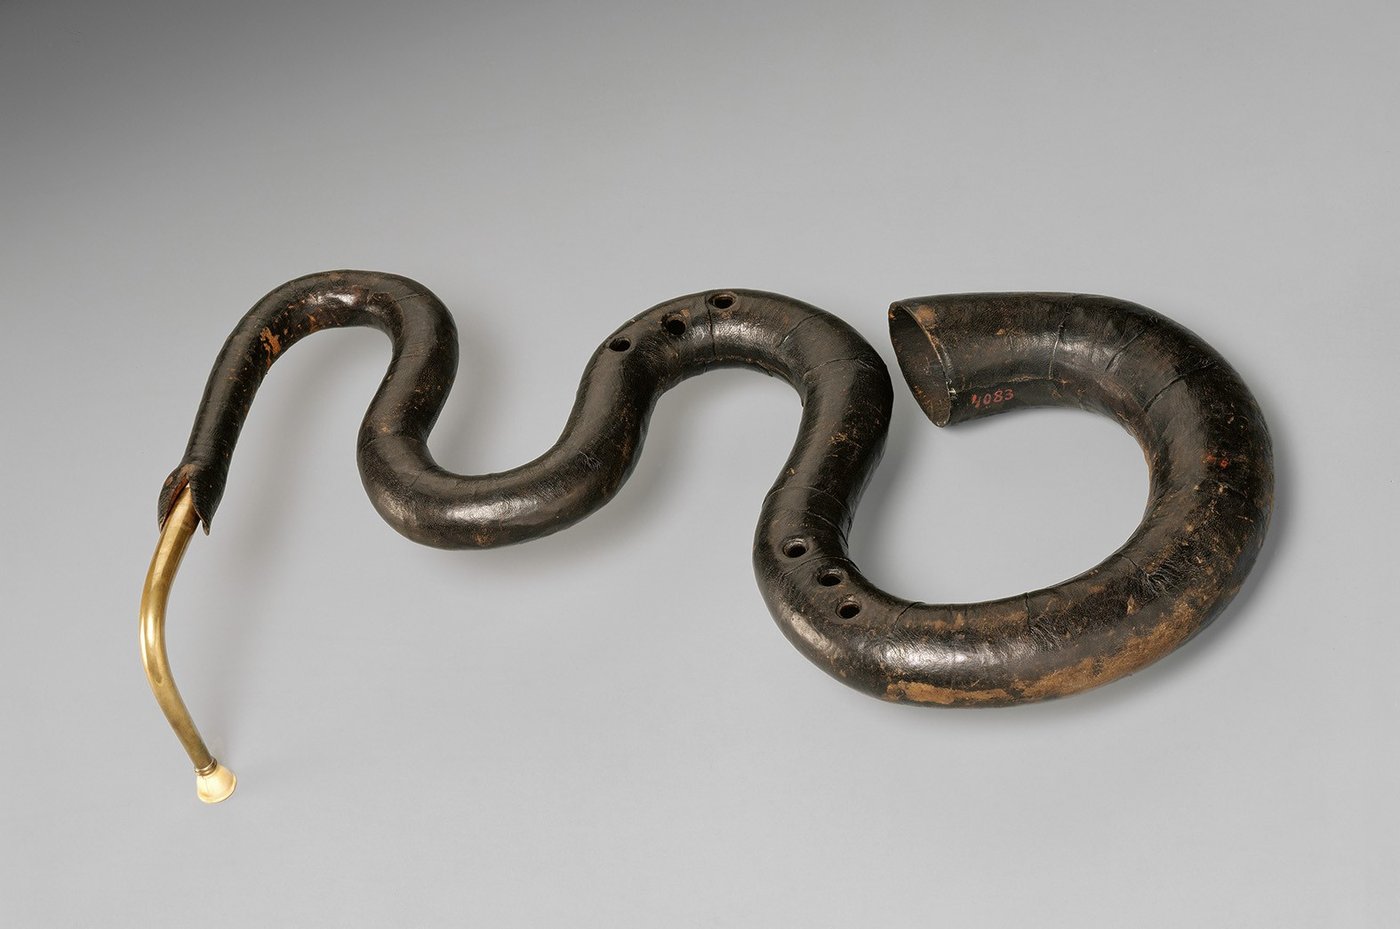 Flute-like instrument from the 16th century in the shape of a snake.